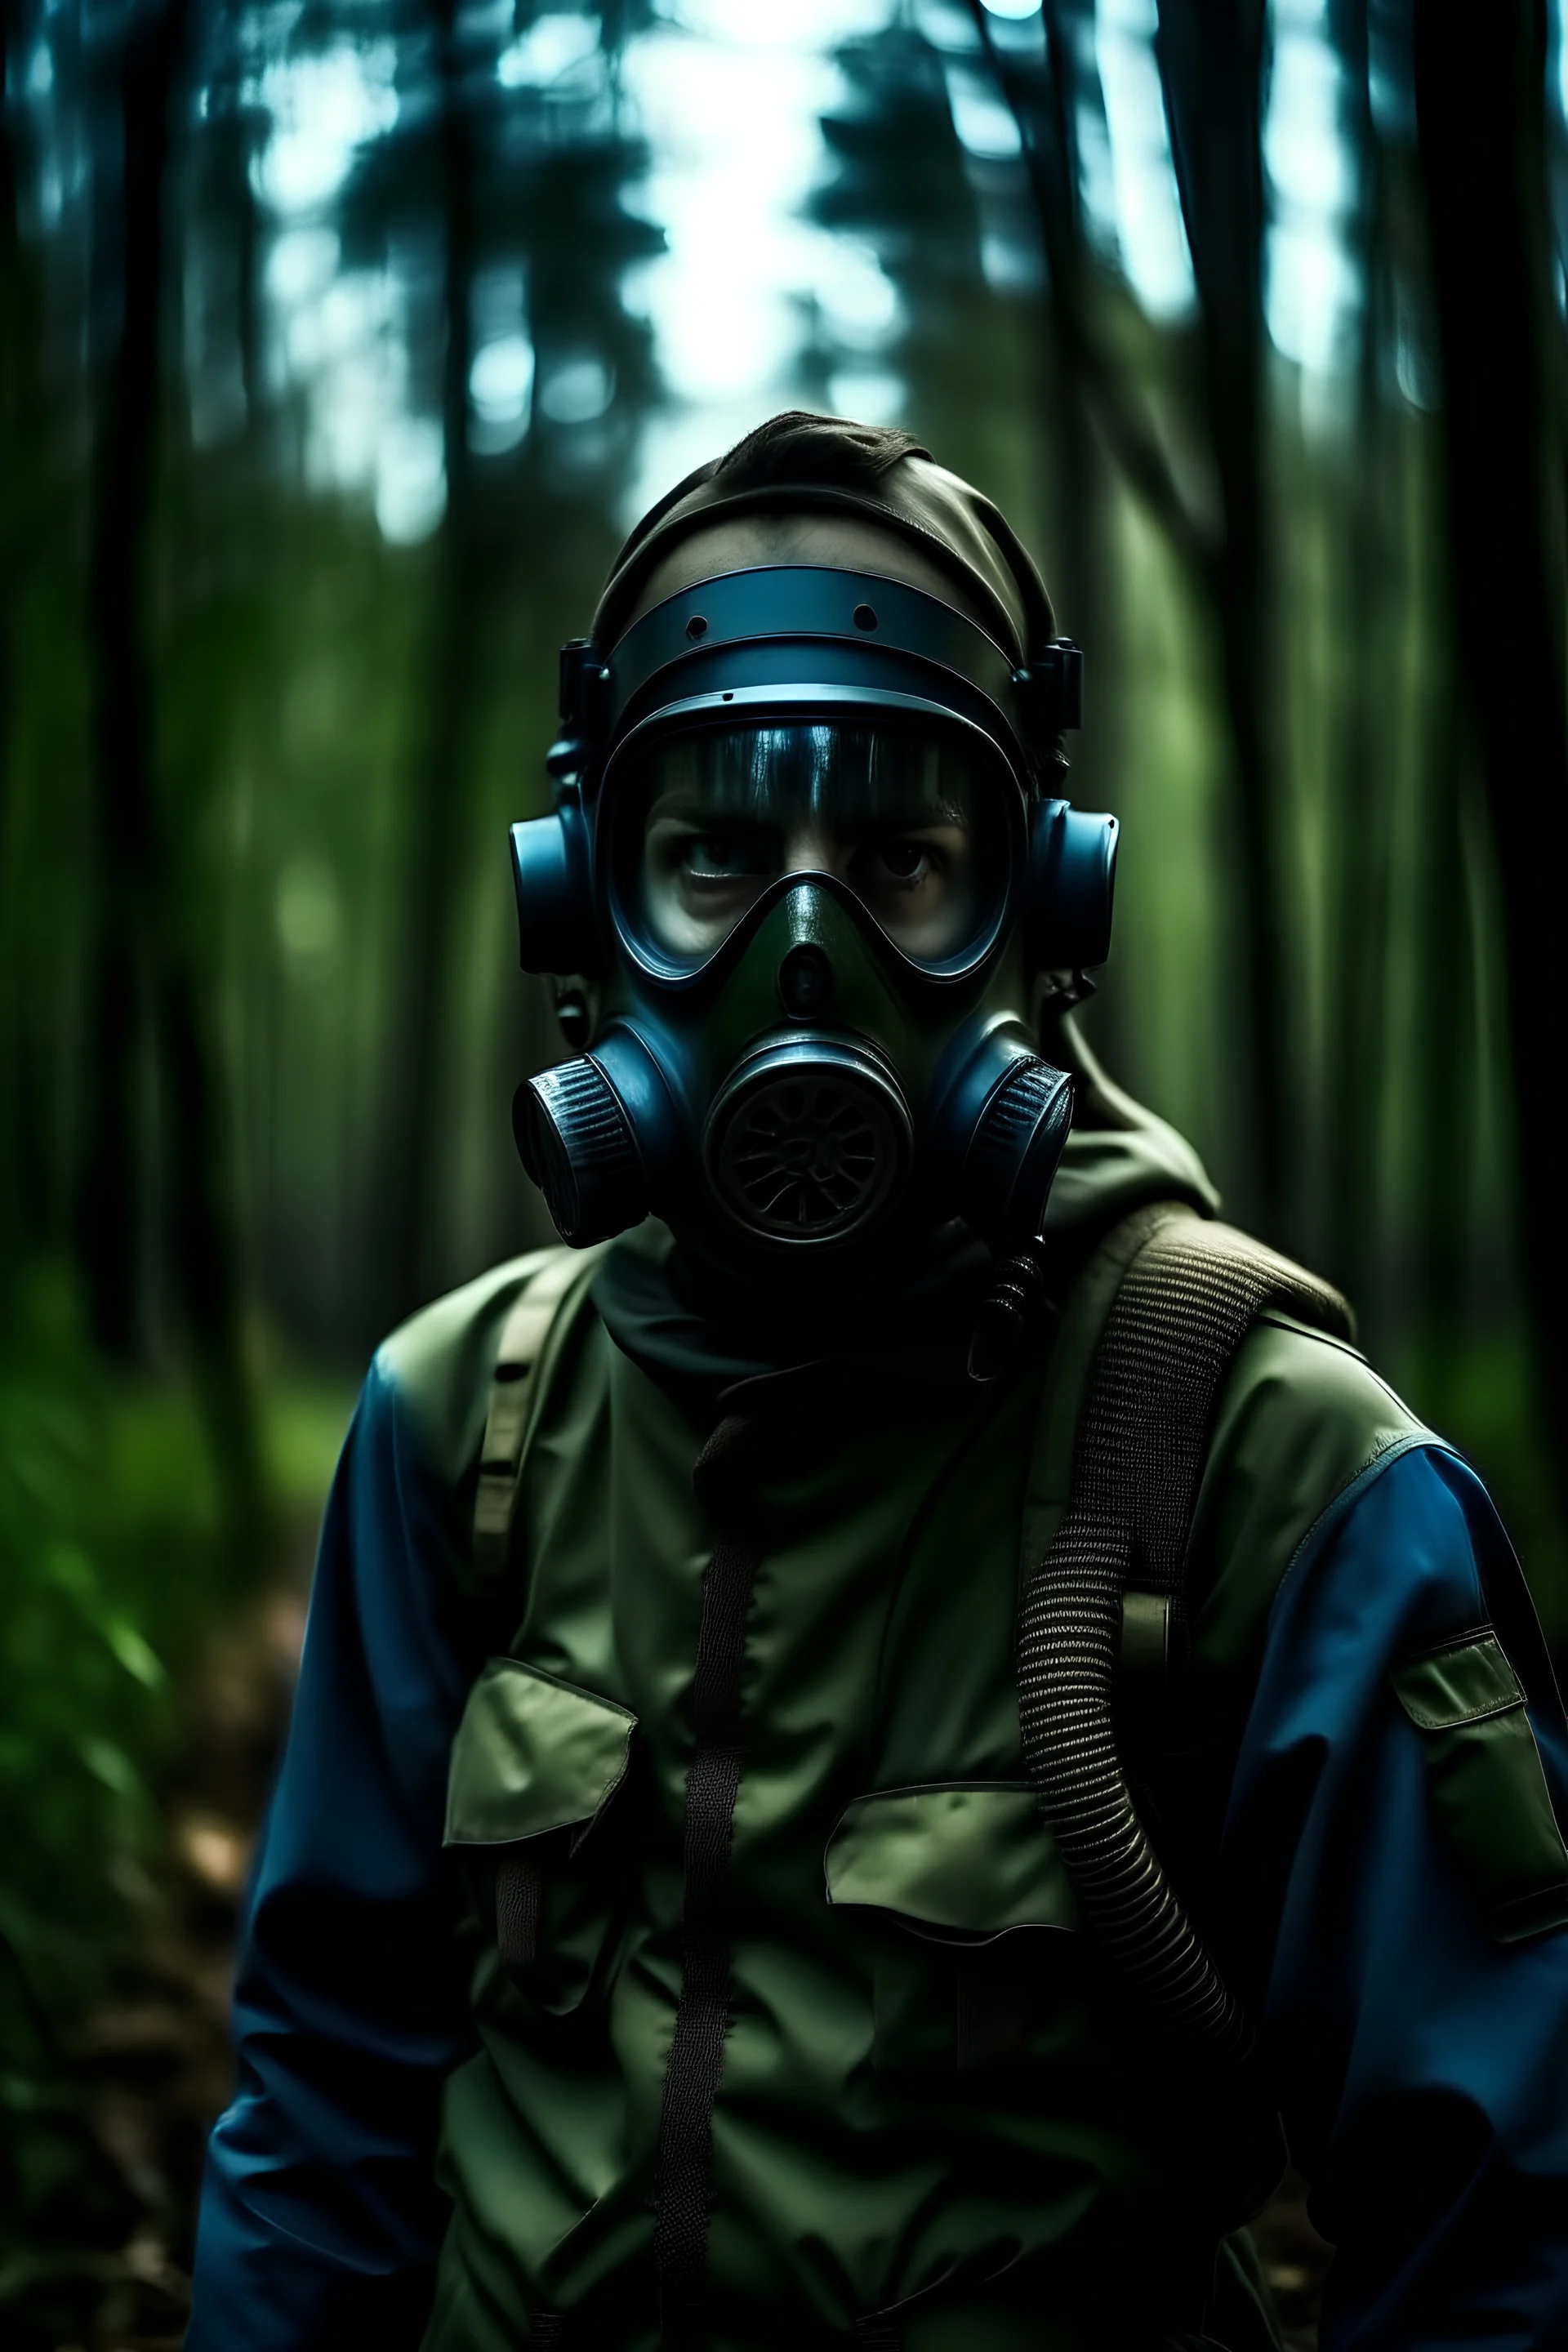 Modern soldier with glowing eyes wearing a gas mask standing in a forest at dusk.